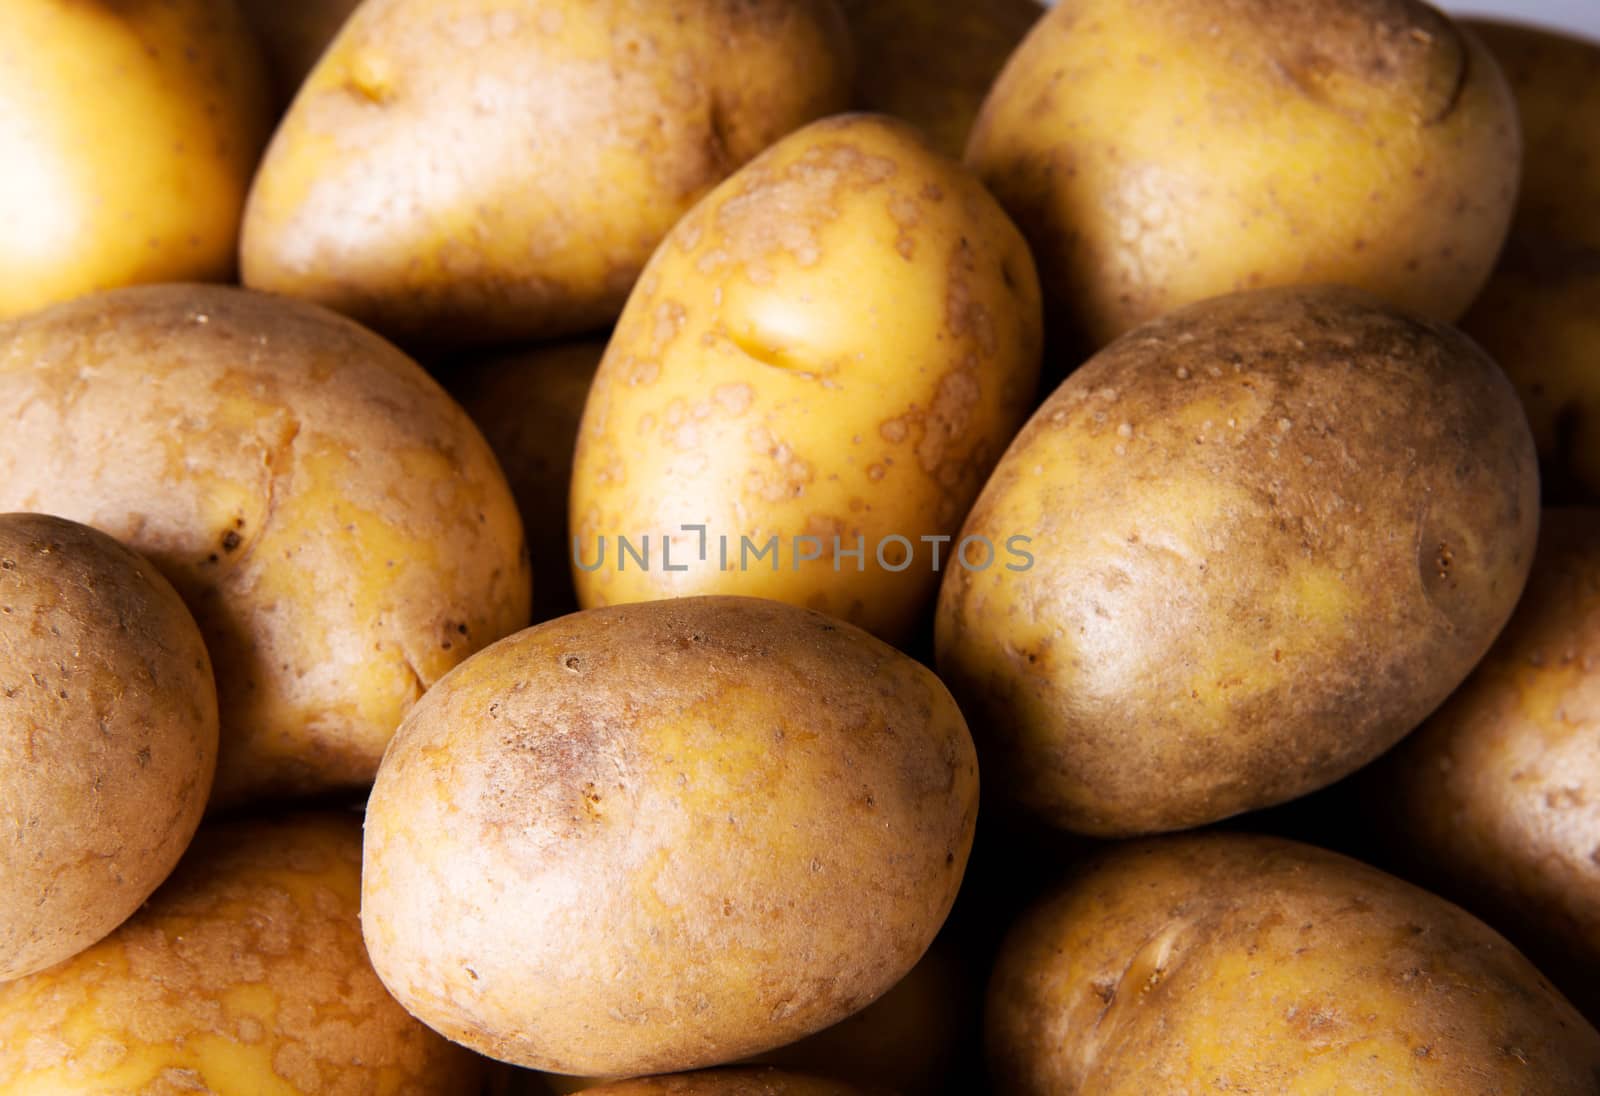 Fresh potatoes.Over wooden background.